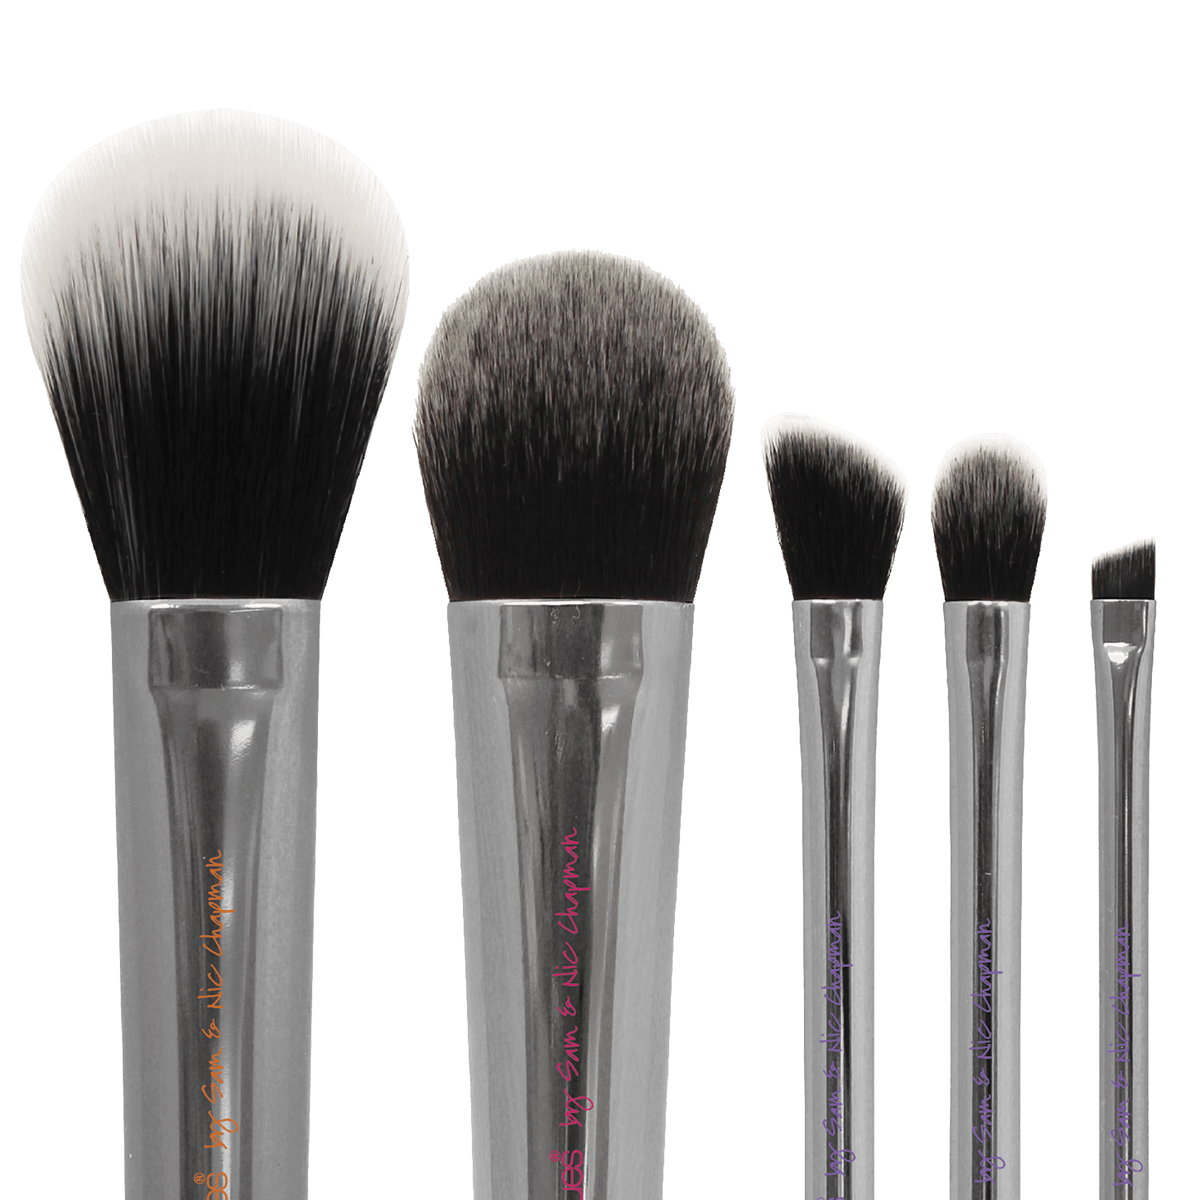 Real Techniques Cosmetic Brush Set Nic's Picks Heads